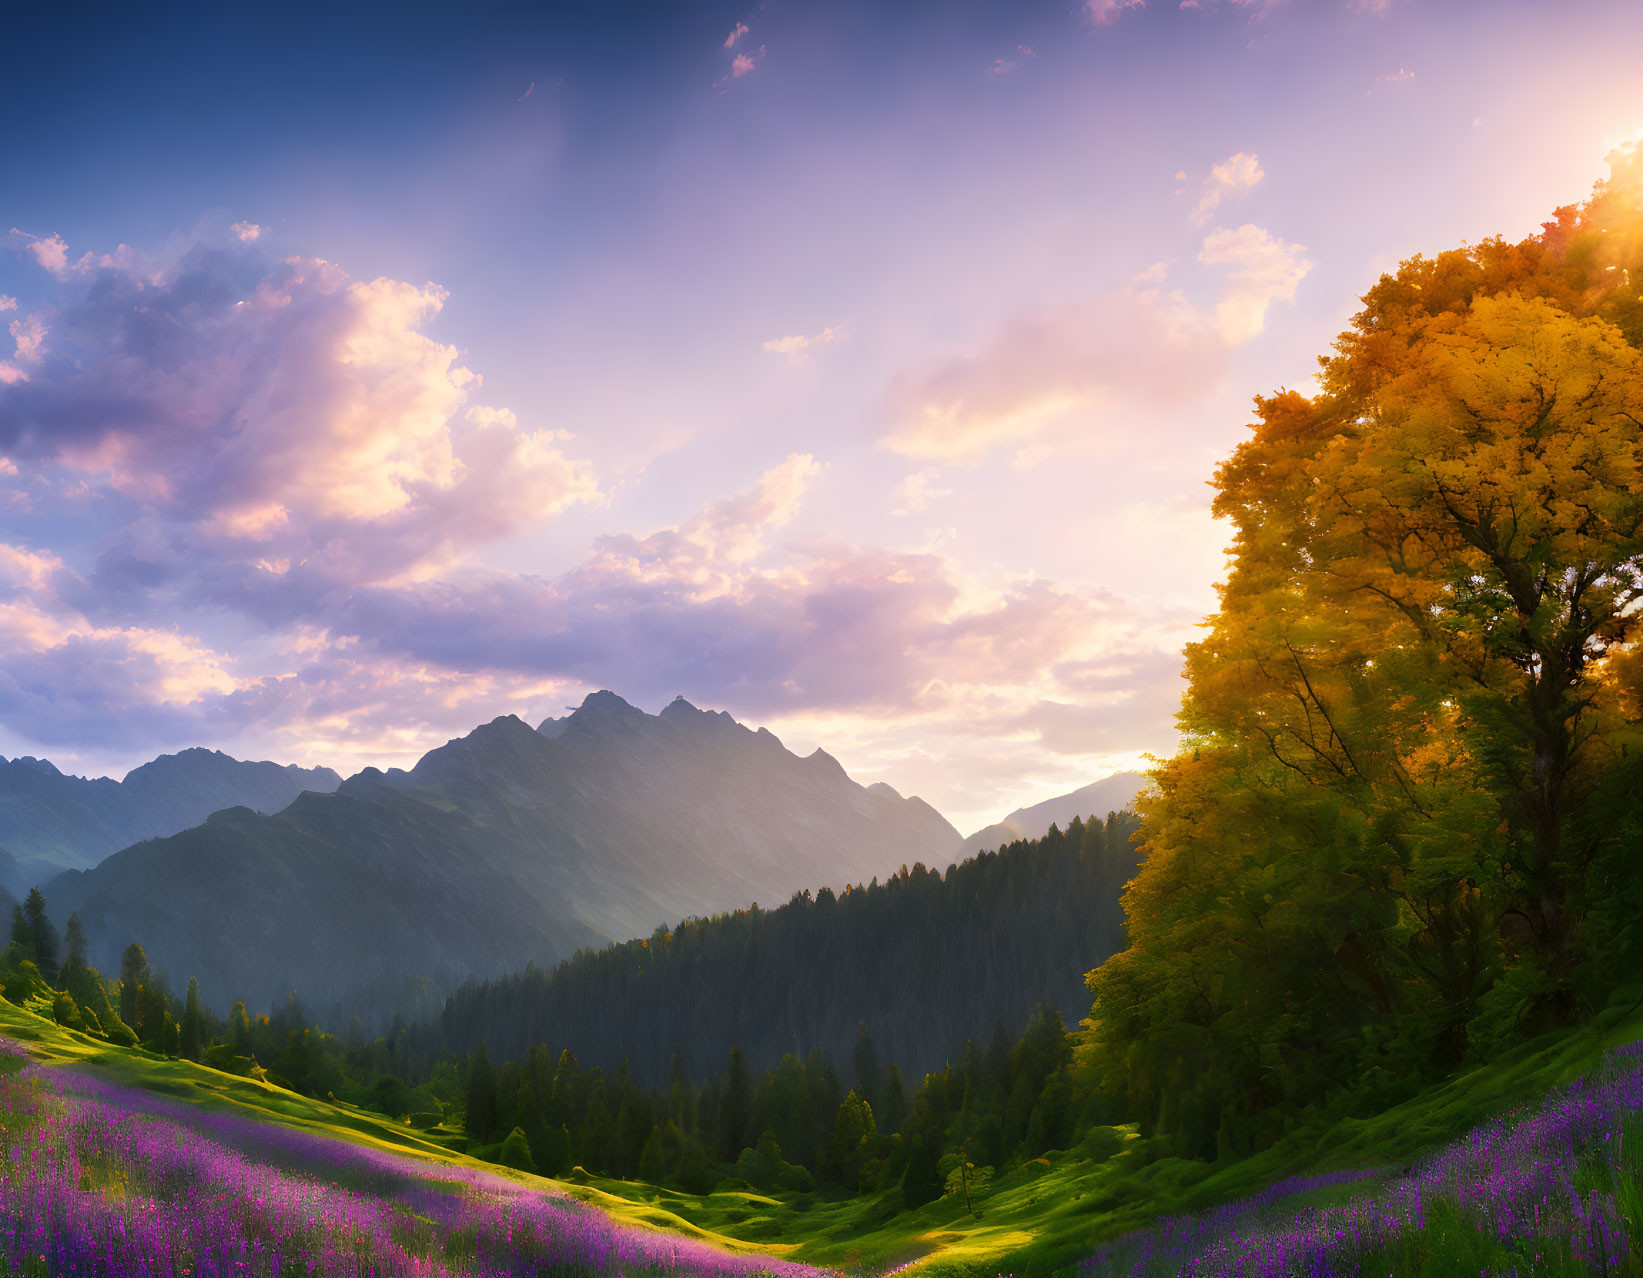 Tranquil sunset mountain landscape with vibrant wildflowers and lush green trees